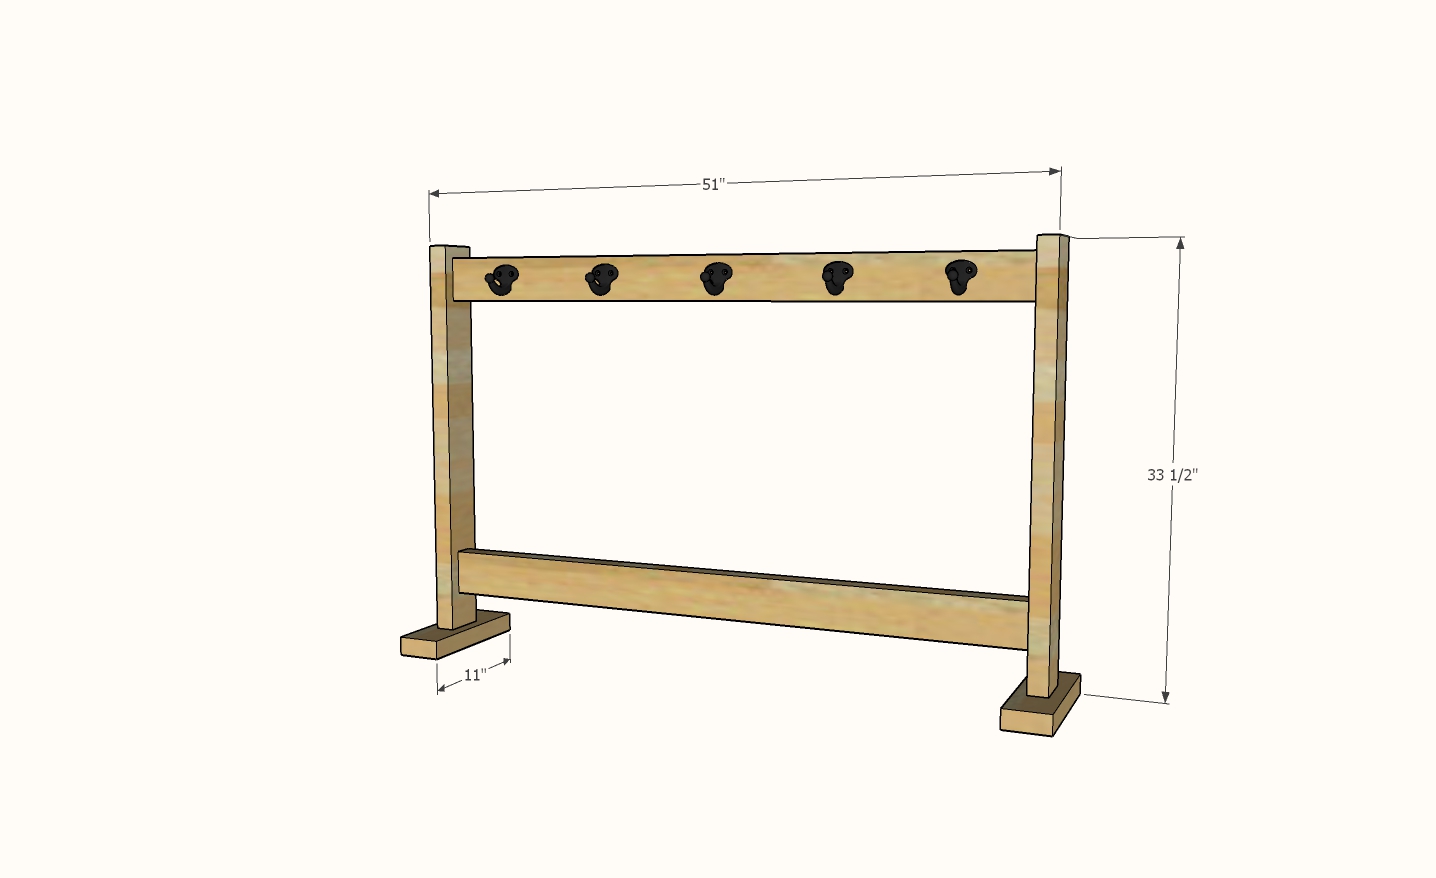 Dimensions diagram for stocking stand